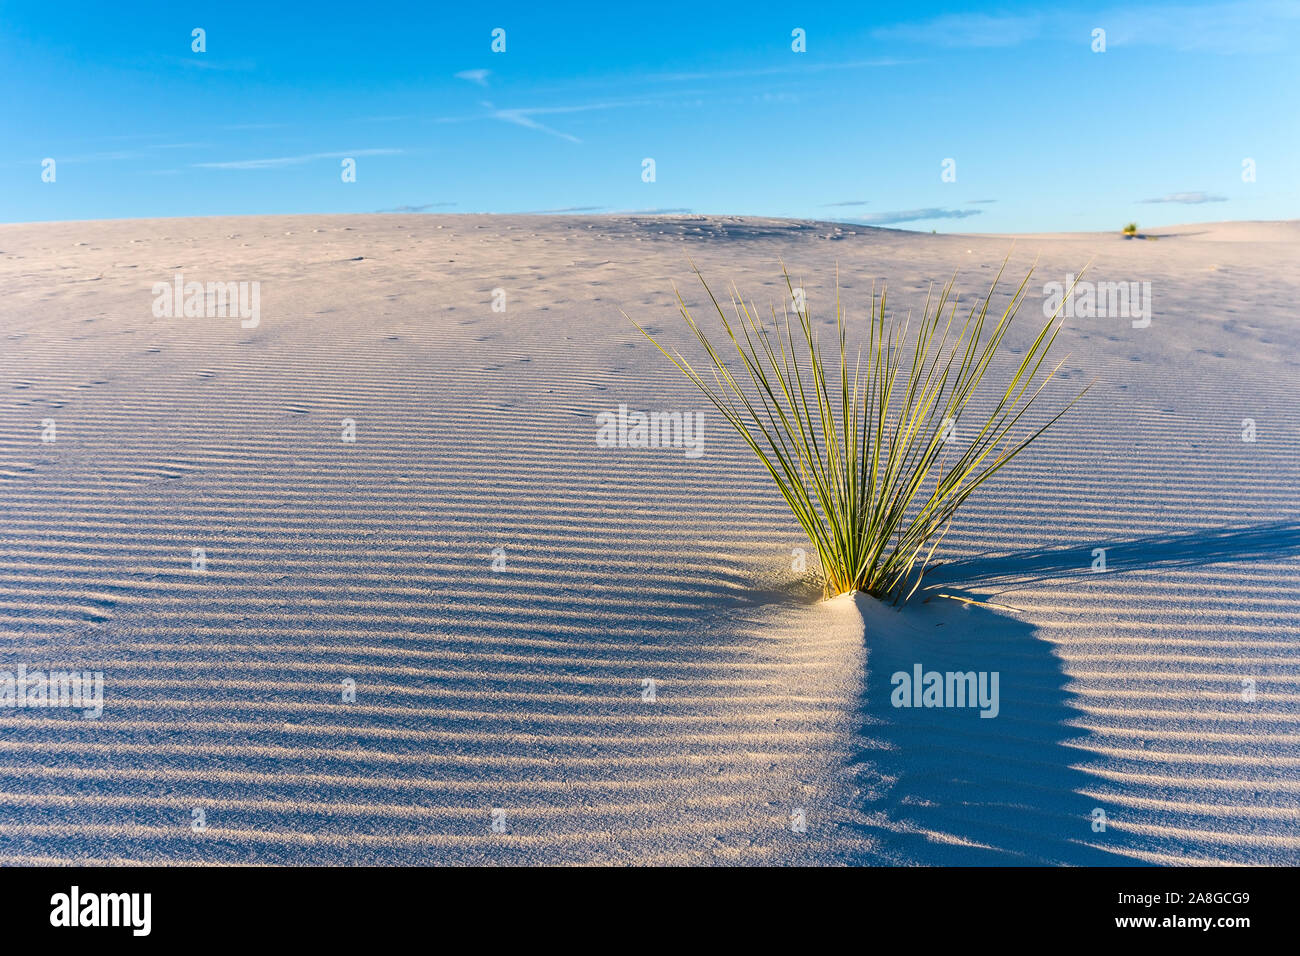 A solitary plant surrounded by gypsum sand ripples on a dune in White Sands National Park, New Mexico, USA Stock Photo